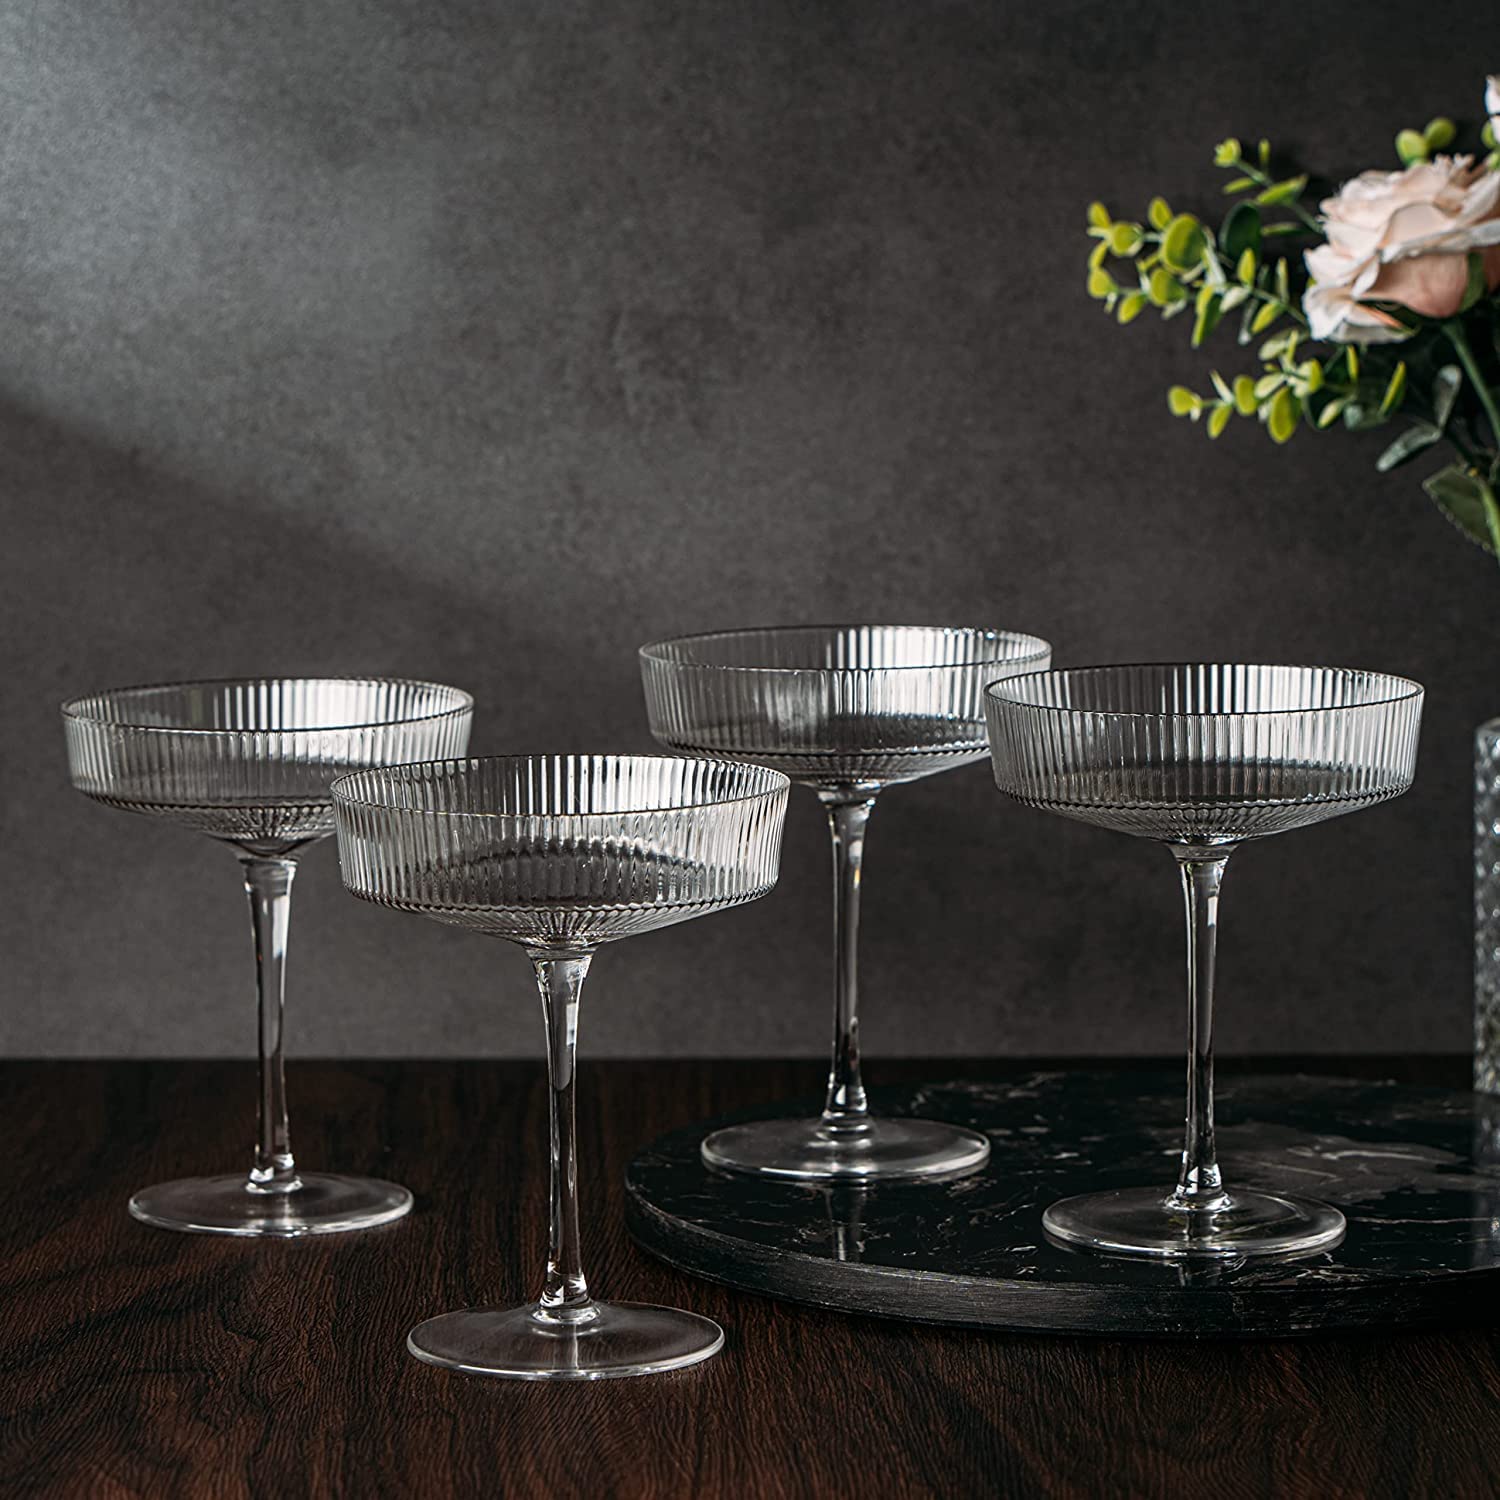 Vintage Art Deco Coupe Glasses, Martini, Champagne & Cocktail Ribbed Glass 7 oz | Set of 4 | Crystal, Manhattan, Cosmopolitan, Sidecar Cocktail Glassware for Champagne , Ripple Glassware - Gift Box